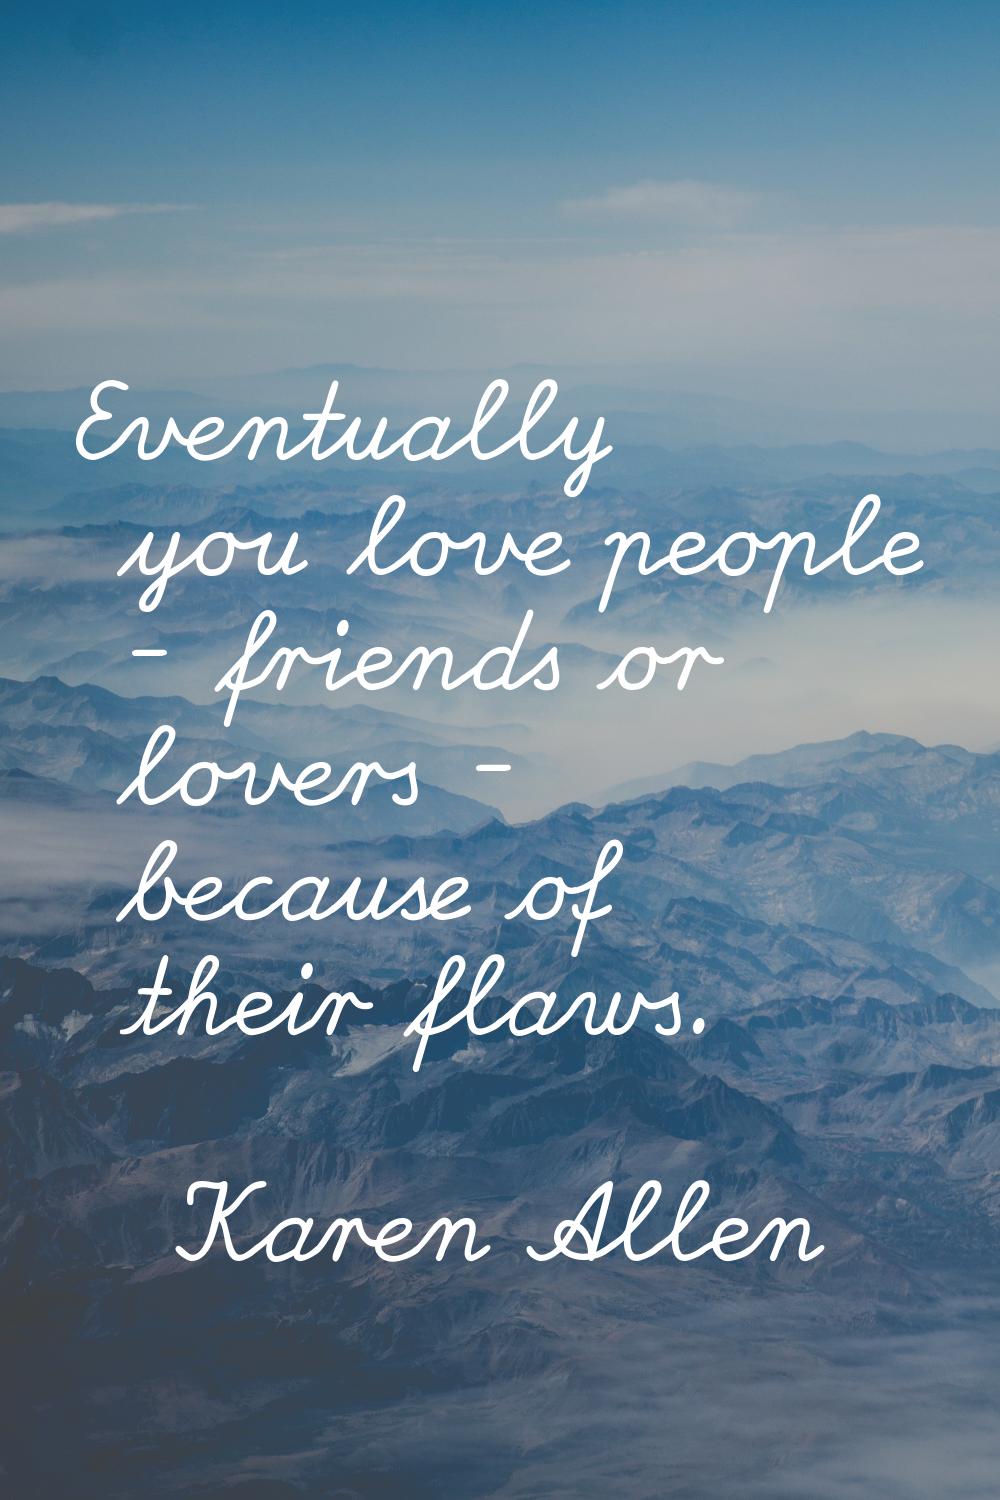 Eventually you love people - friends or lovers - because of their flaws.